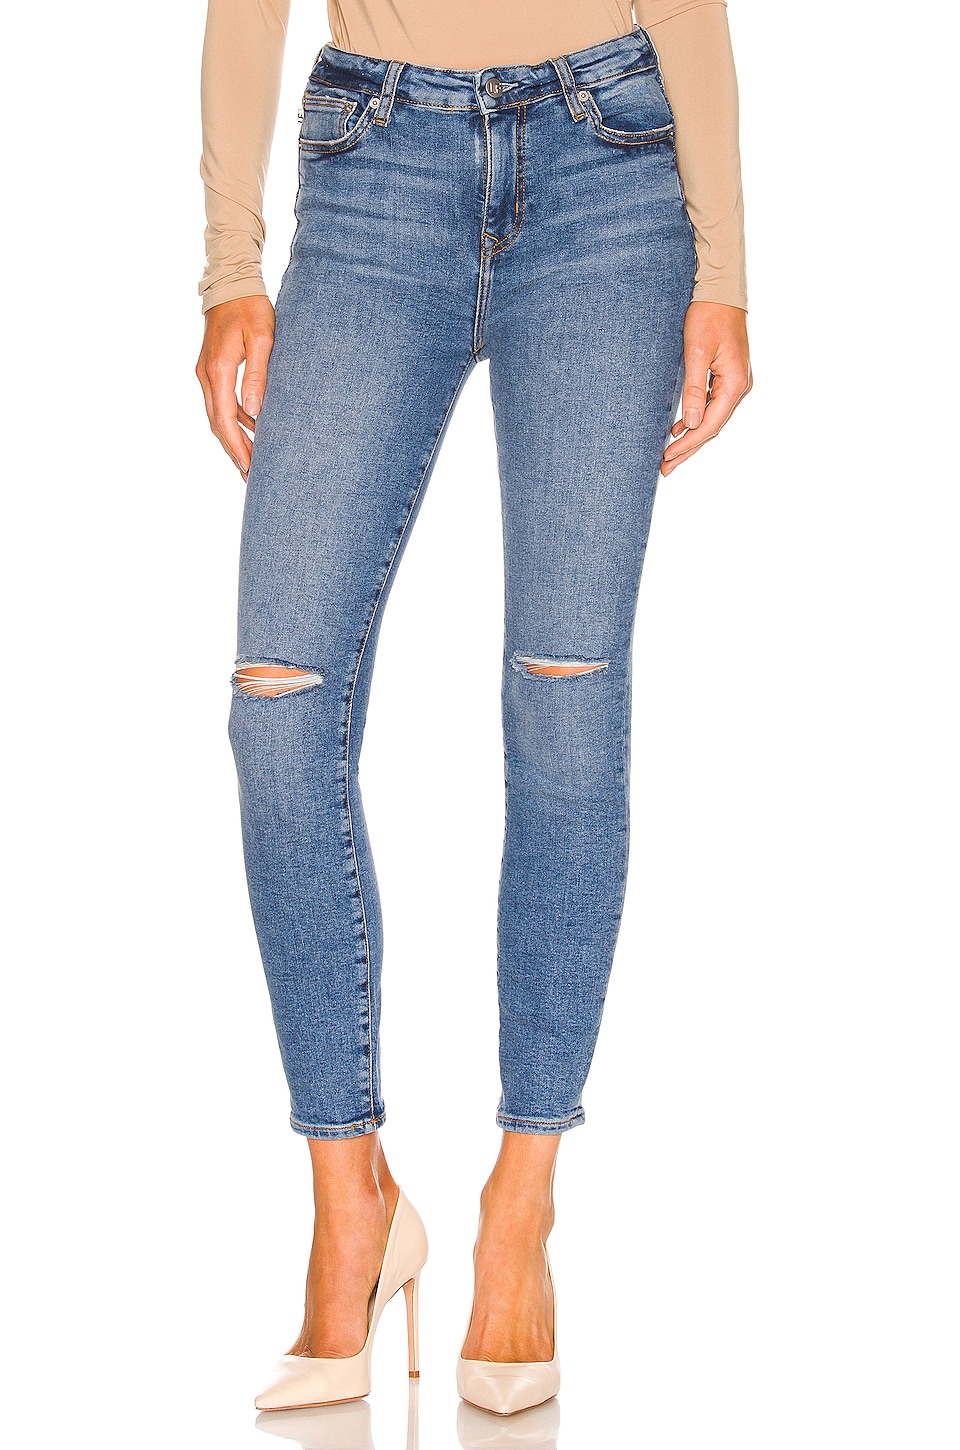 Lovers and Friends Ricky Low Rise Skinny in Marabella | REVOLVE